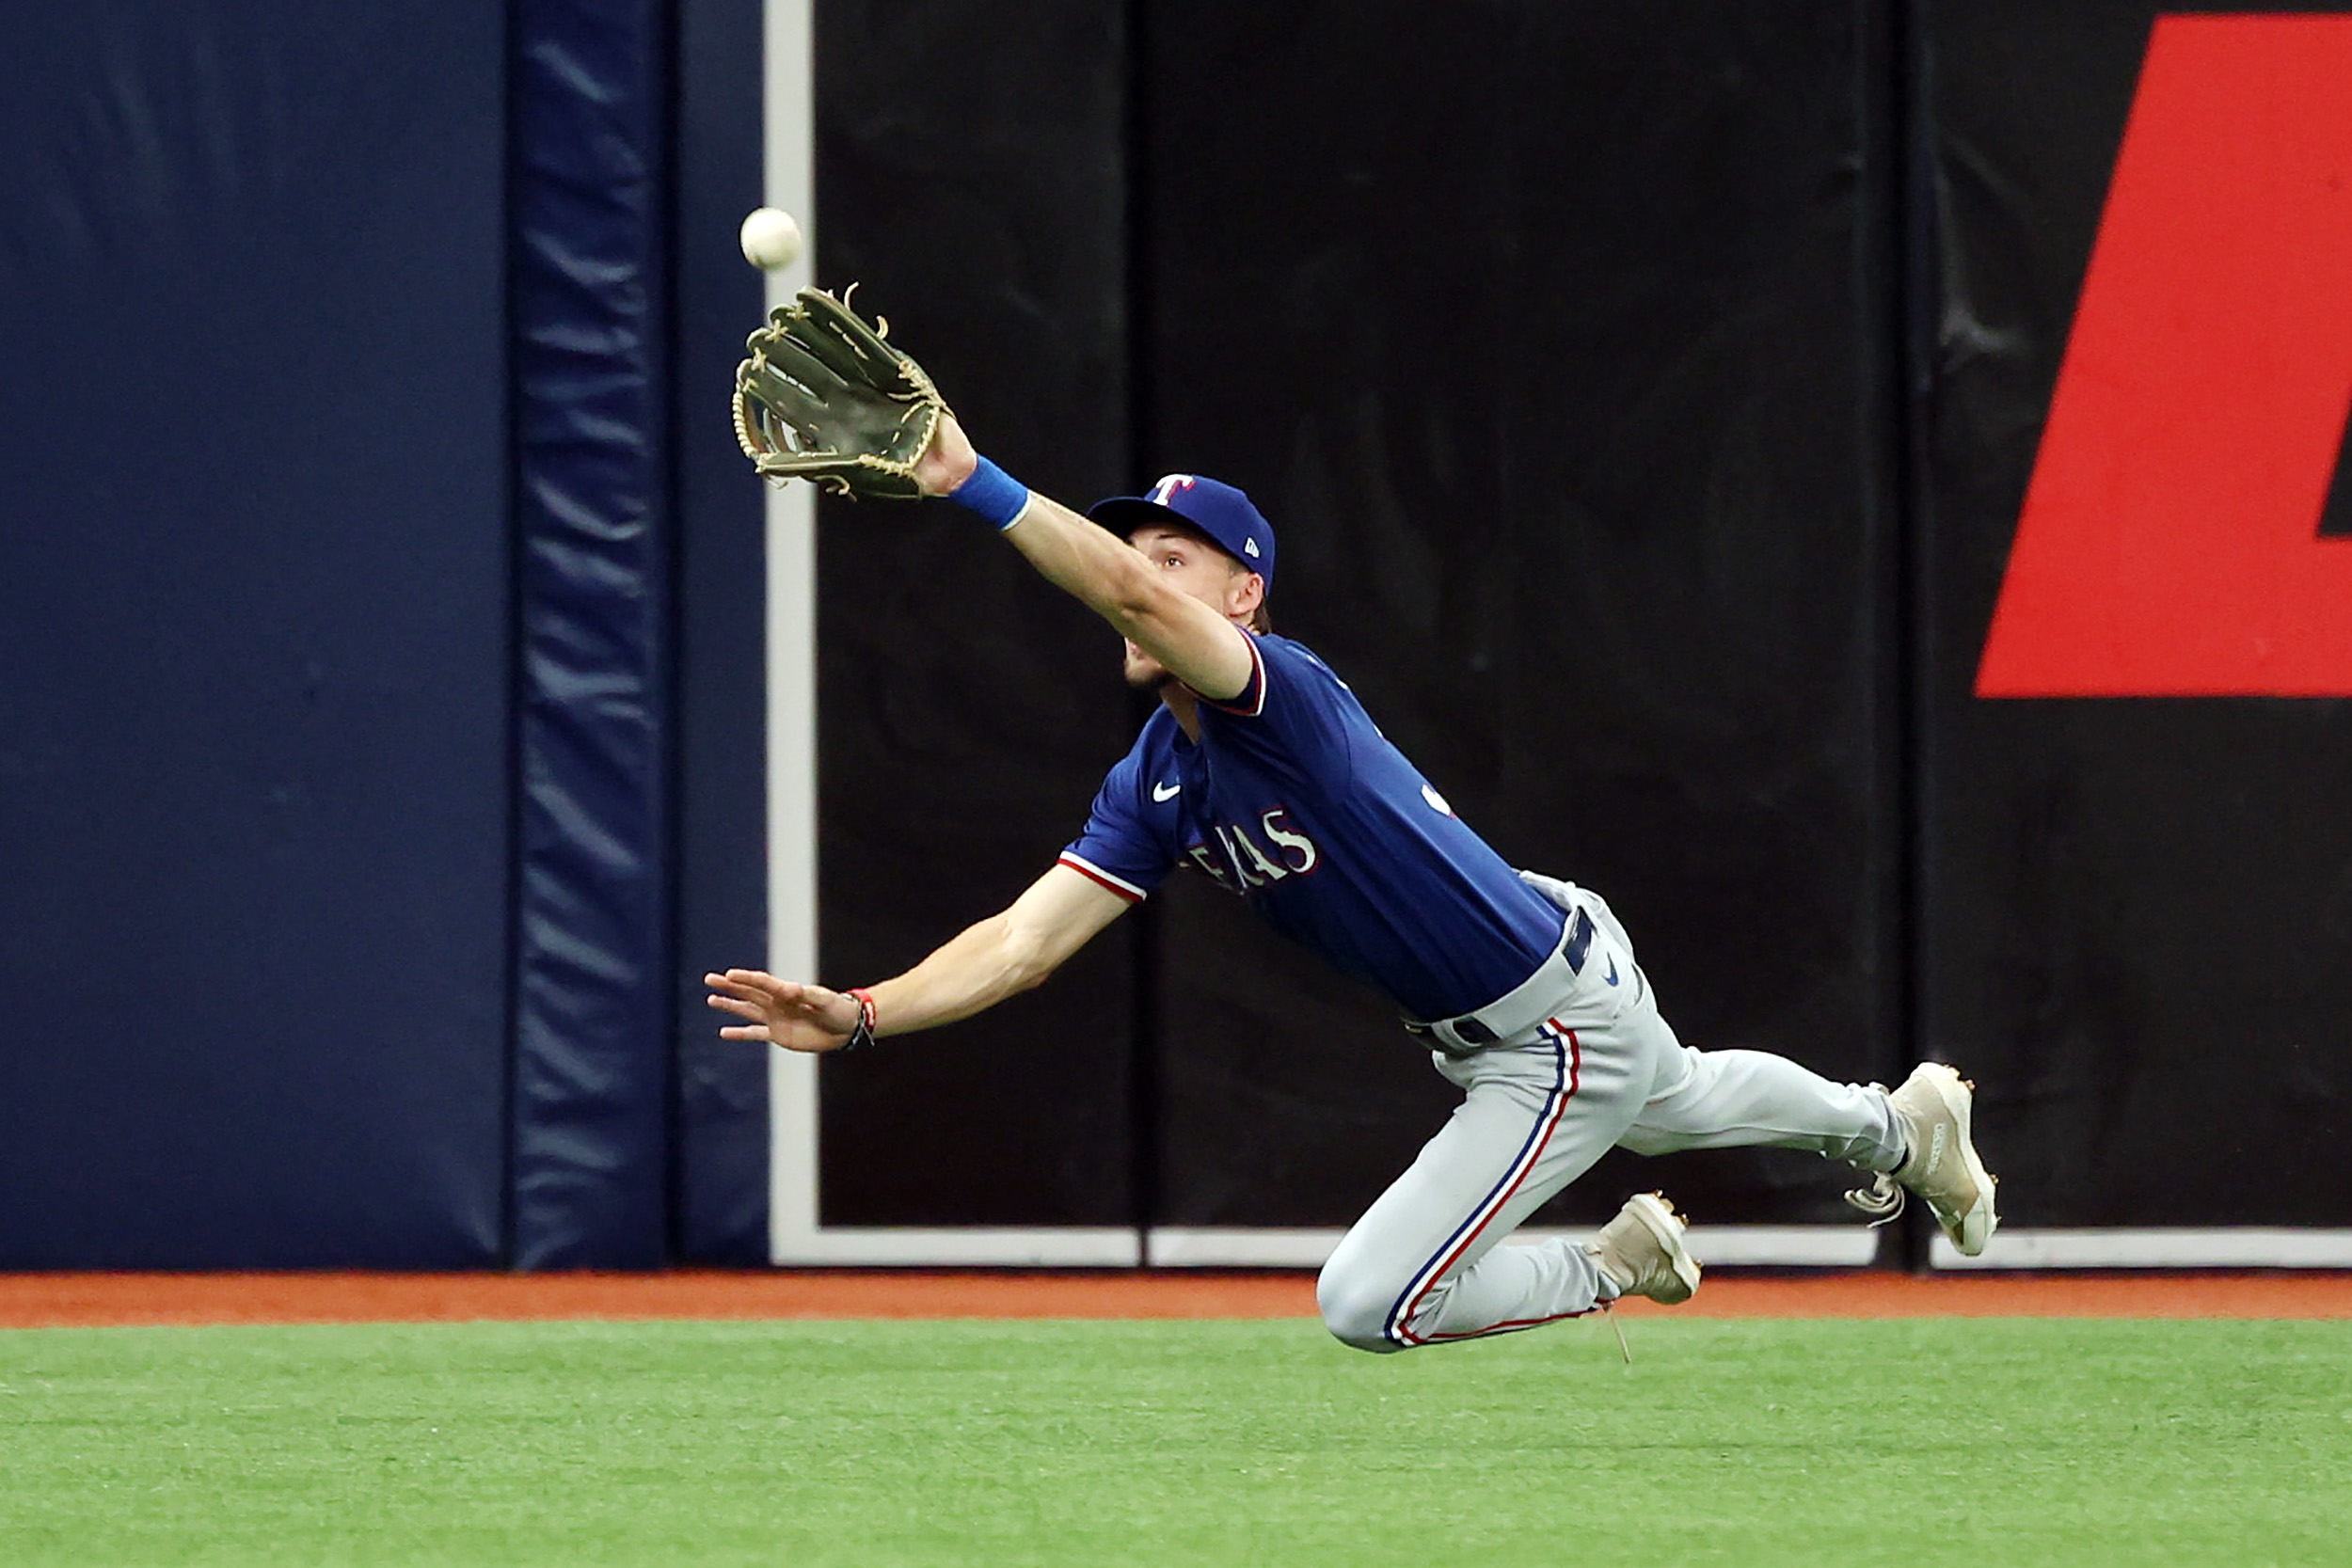 Texas Rangers left fielder Evan Carter catches a fly ball hit by Tampa Bay Rays third baseman Isaac Paredes in the first inning during Game 1 of the AL Wild Card series on Oct. 3 at Tropicana Field.